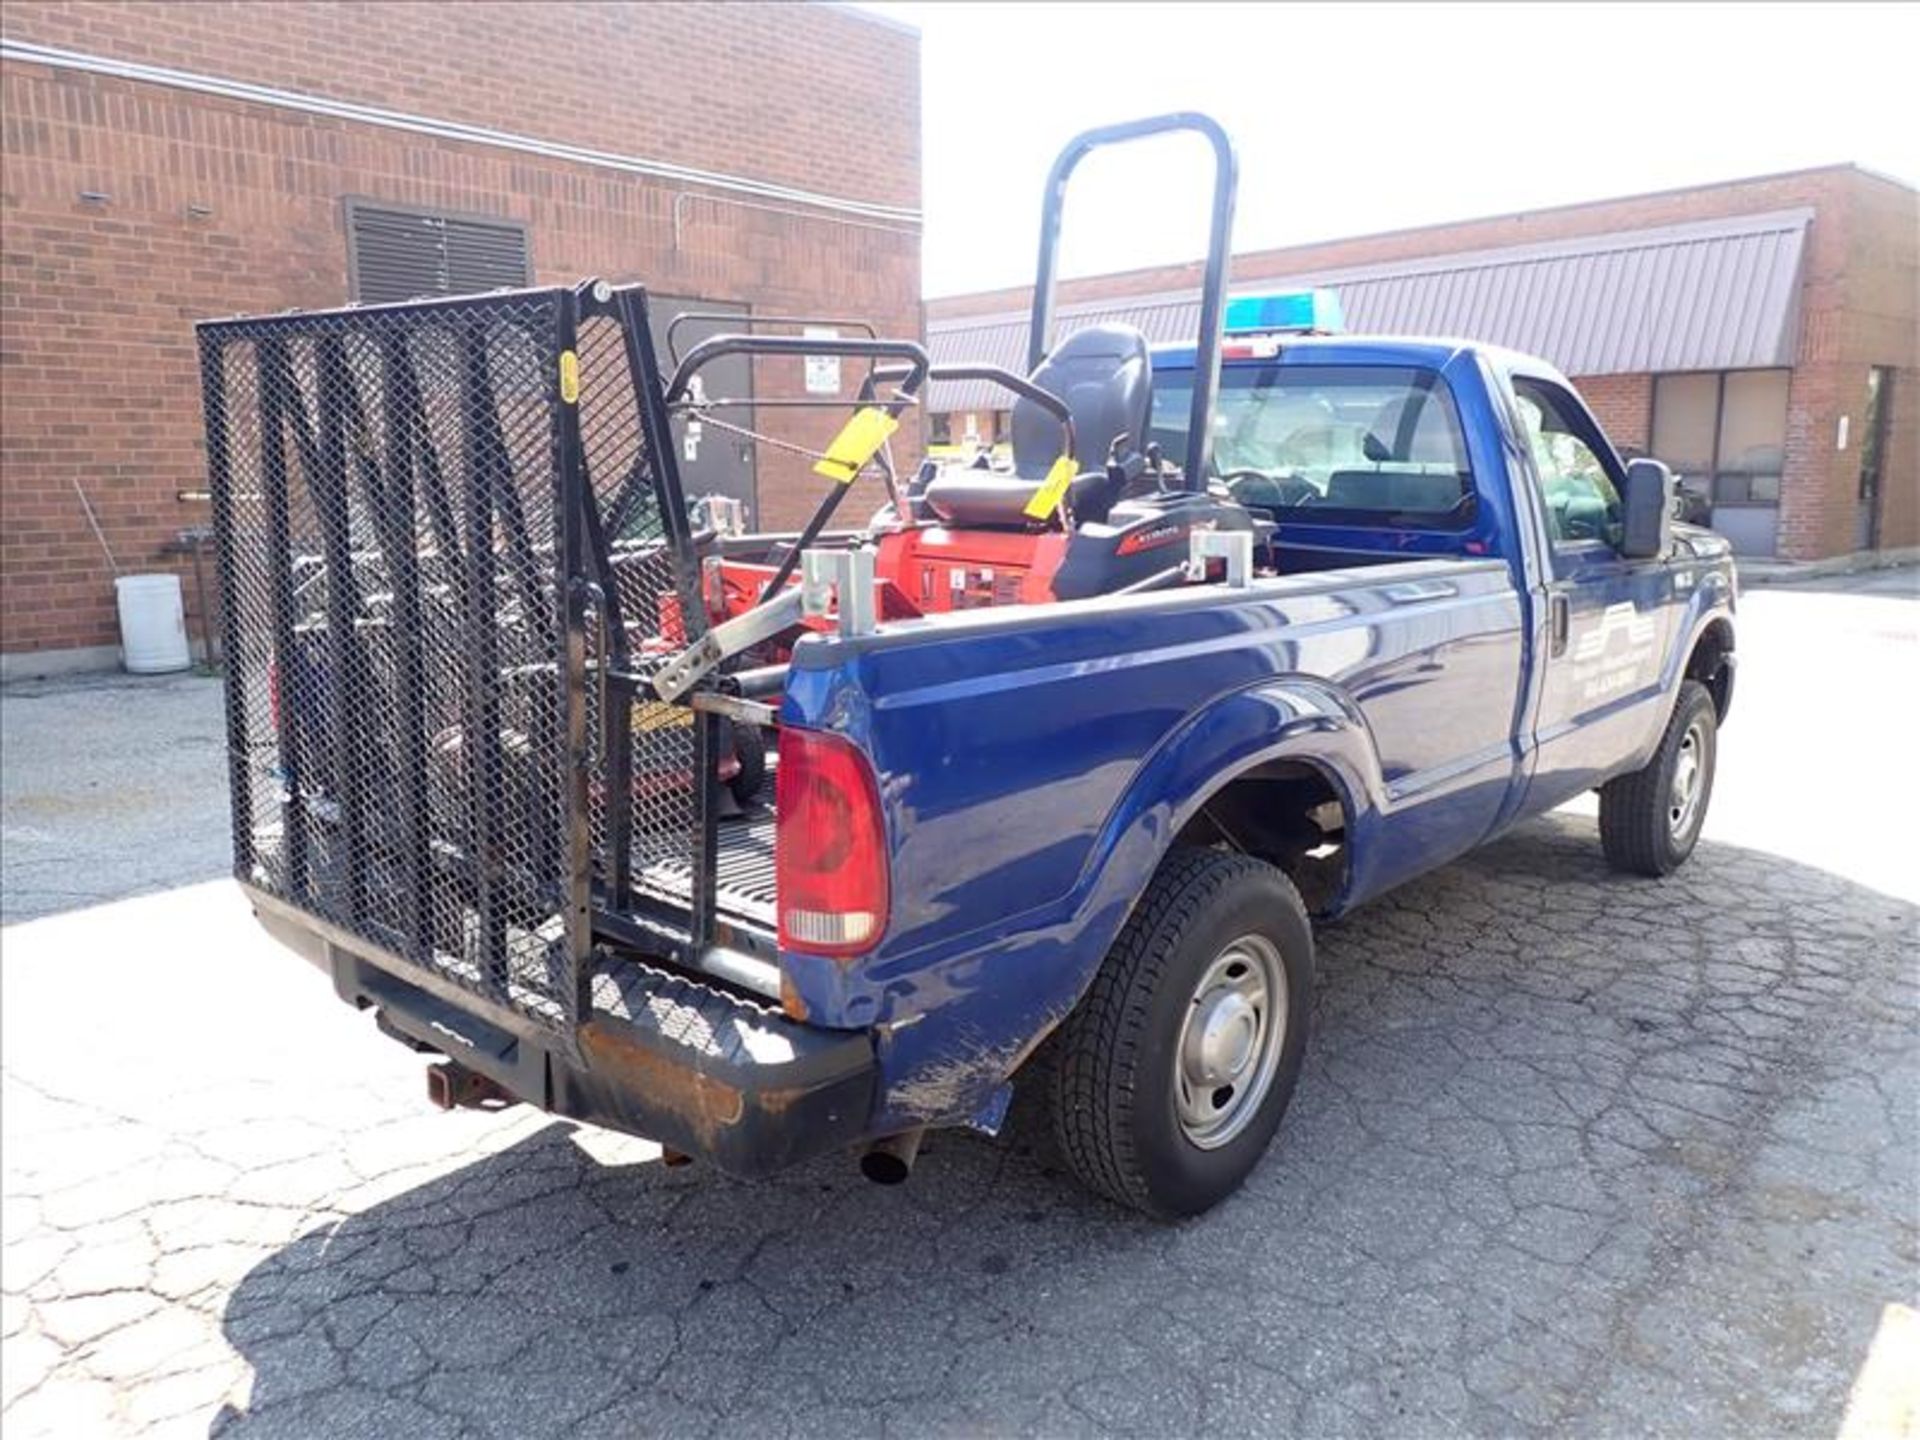 2012 Ford F-250 SD Super Duty XL Pick Up Truck, 83230 km, 6.2L engine, 4WD, automatic transmission - Image 4 of 11